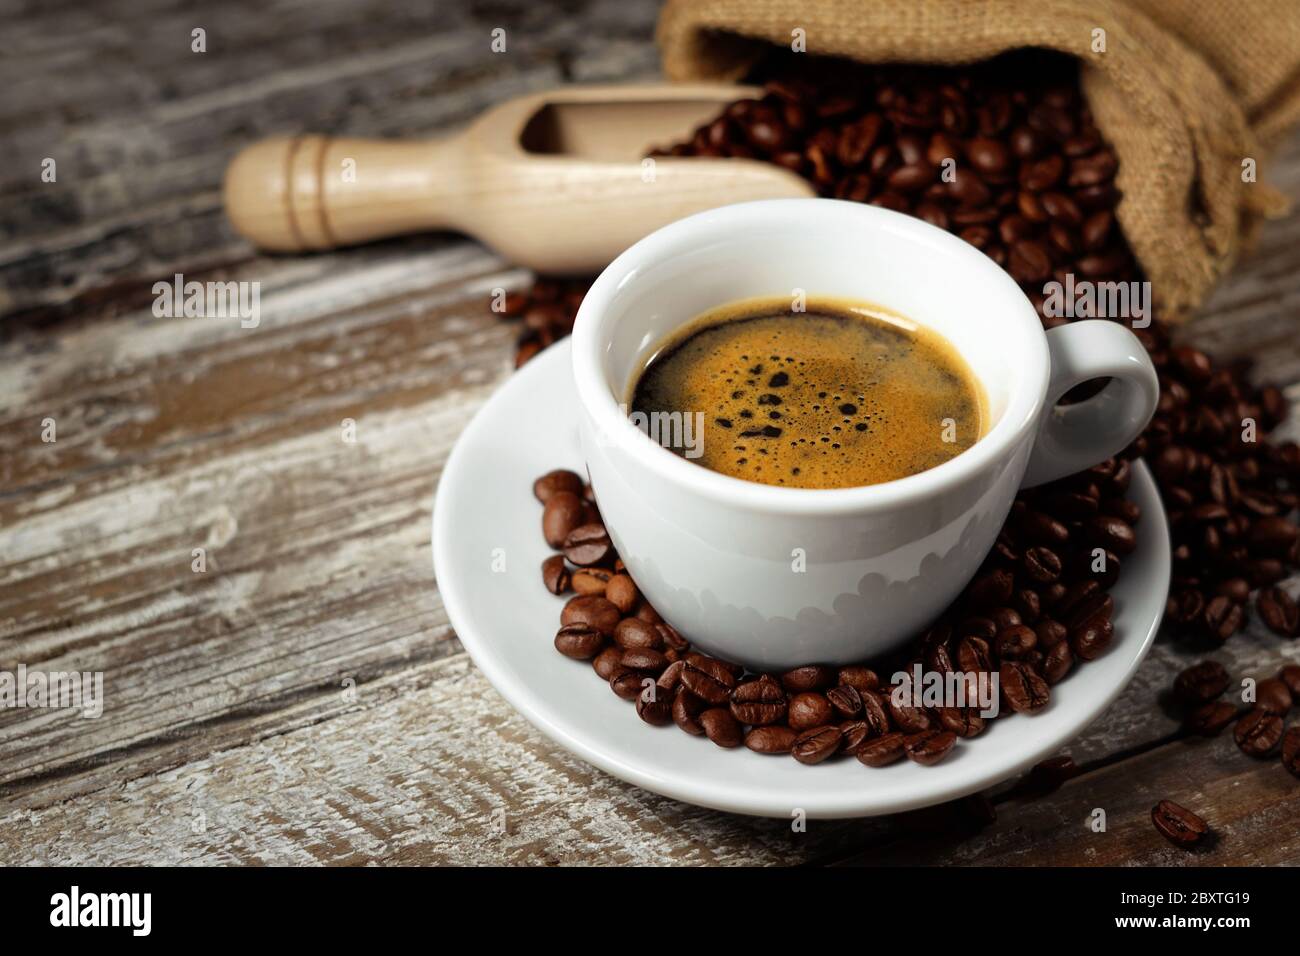 Coffee cup and roasted coffee beans in a burlap sack on a wooden rustic table close up view on rusty vintage background. Stock Photo